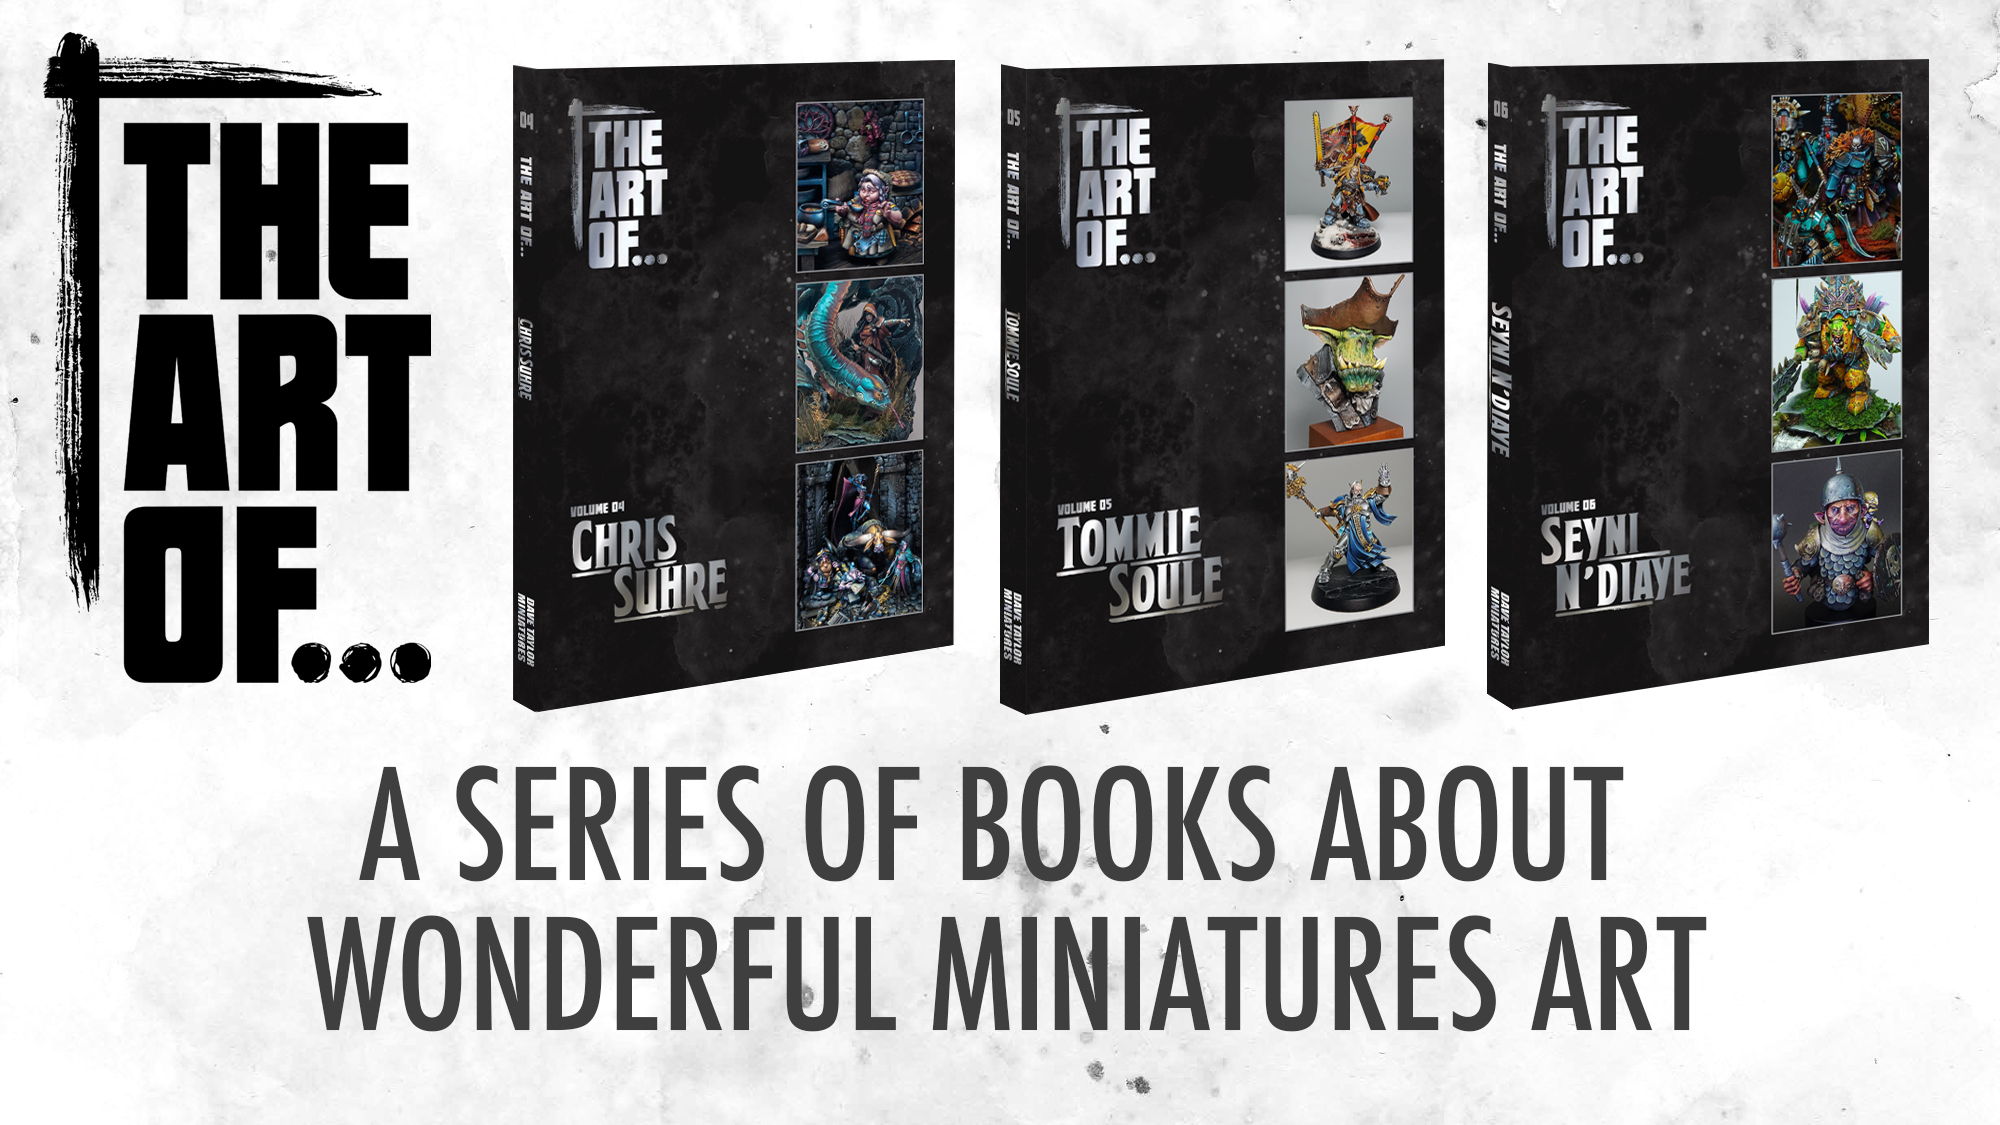 The Art Of... Volumes 4-6 - Dave Taylor Miniatures